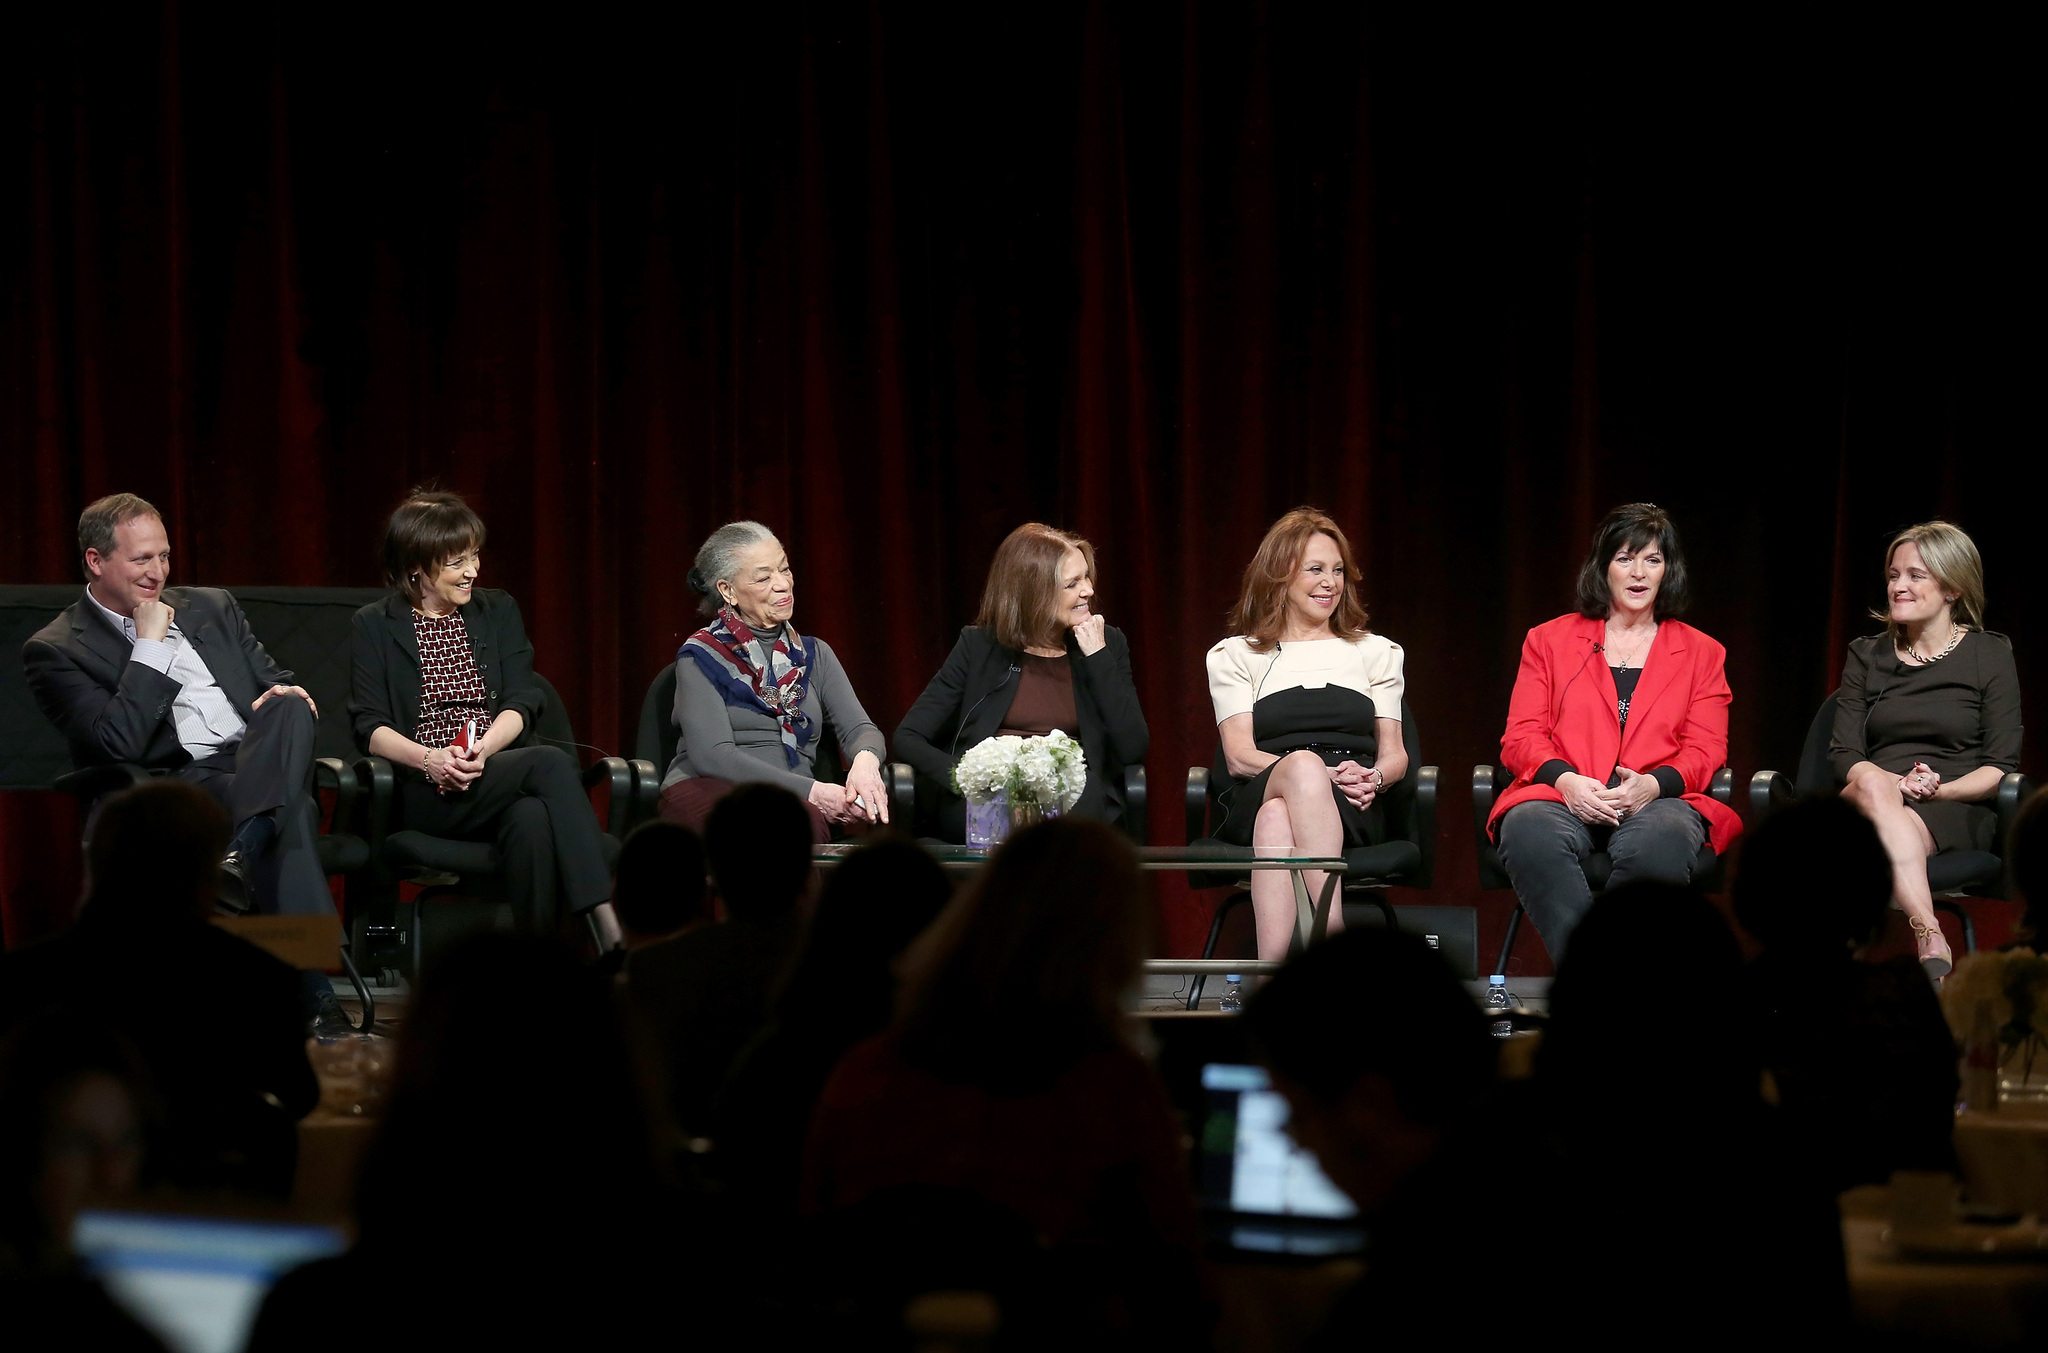 Marlo Thomas, Barak Goodman, Gloria Steinem, Dyllan McGee, Betsy West and Aileen Clarke at event of Makers: Women Who Make America (2013)